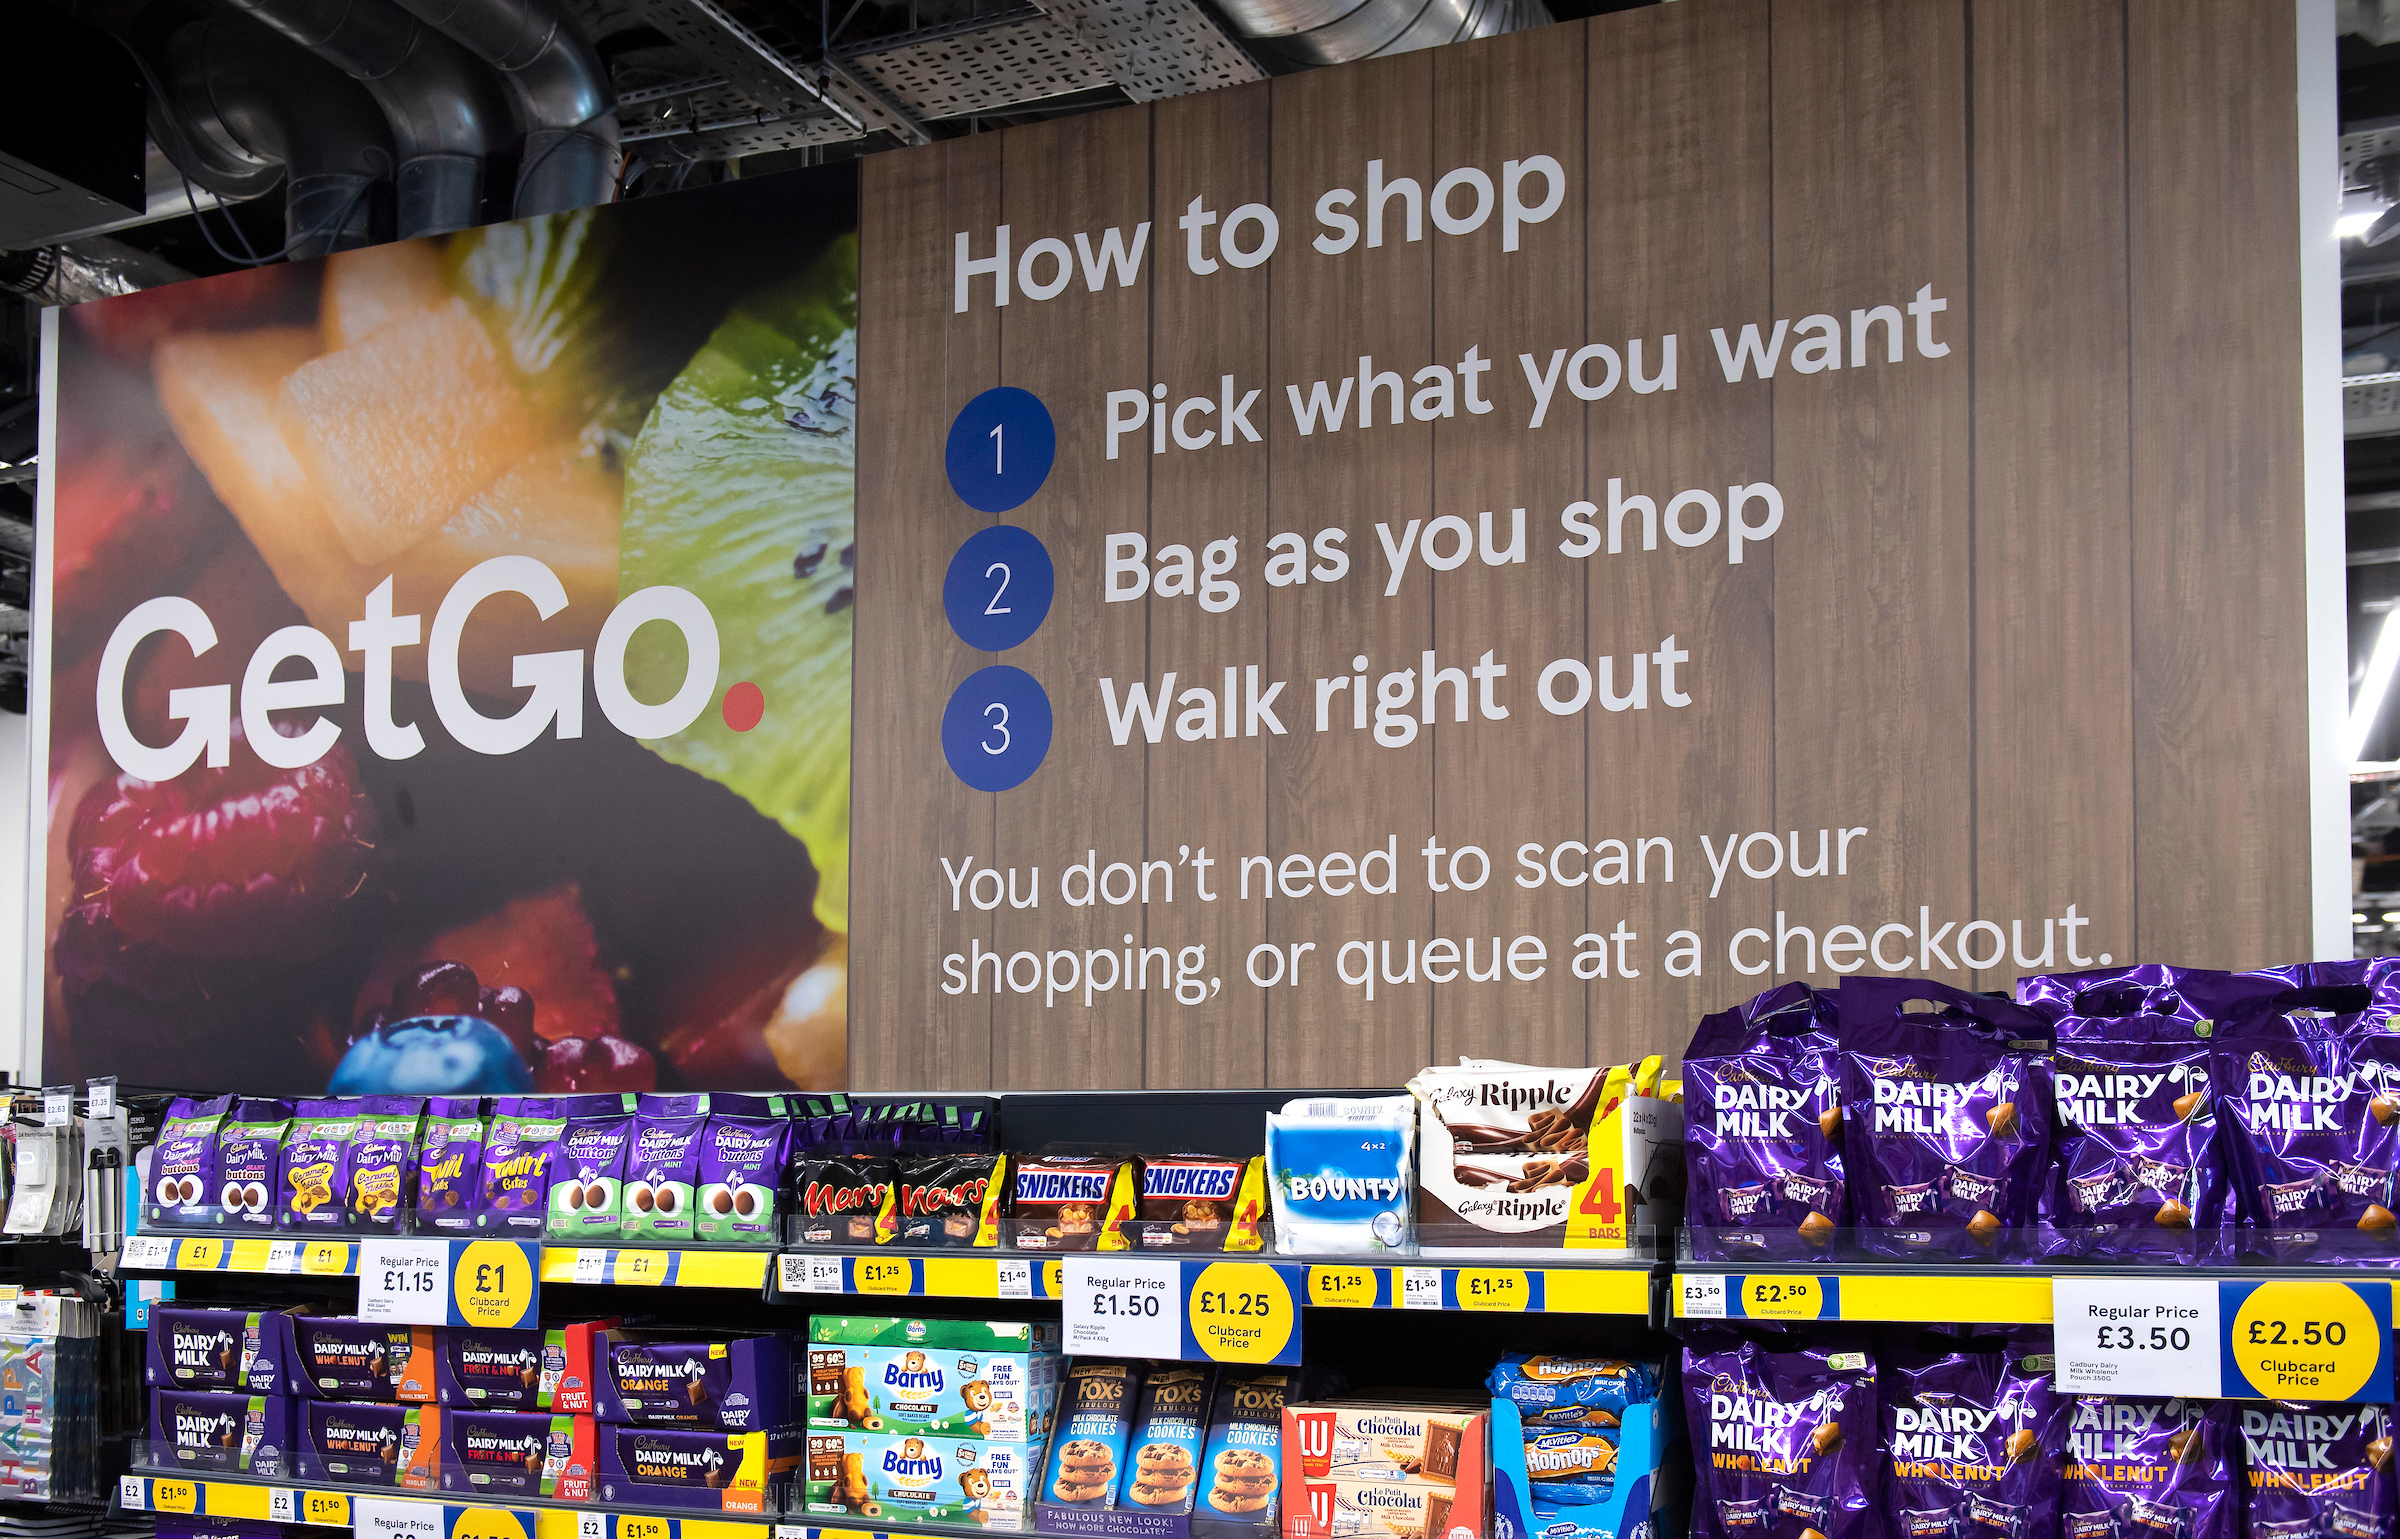 Tesco first trialled its "frictionless" technology in 2019 (Ben Stevens/Parsons Media/PA)